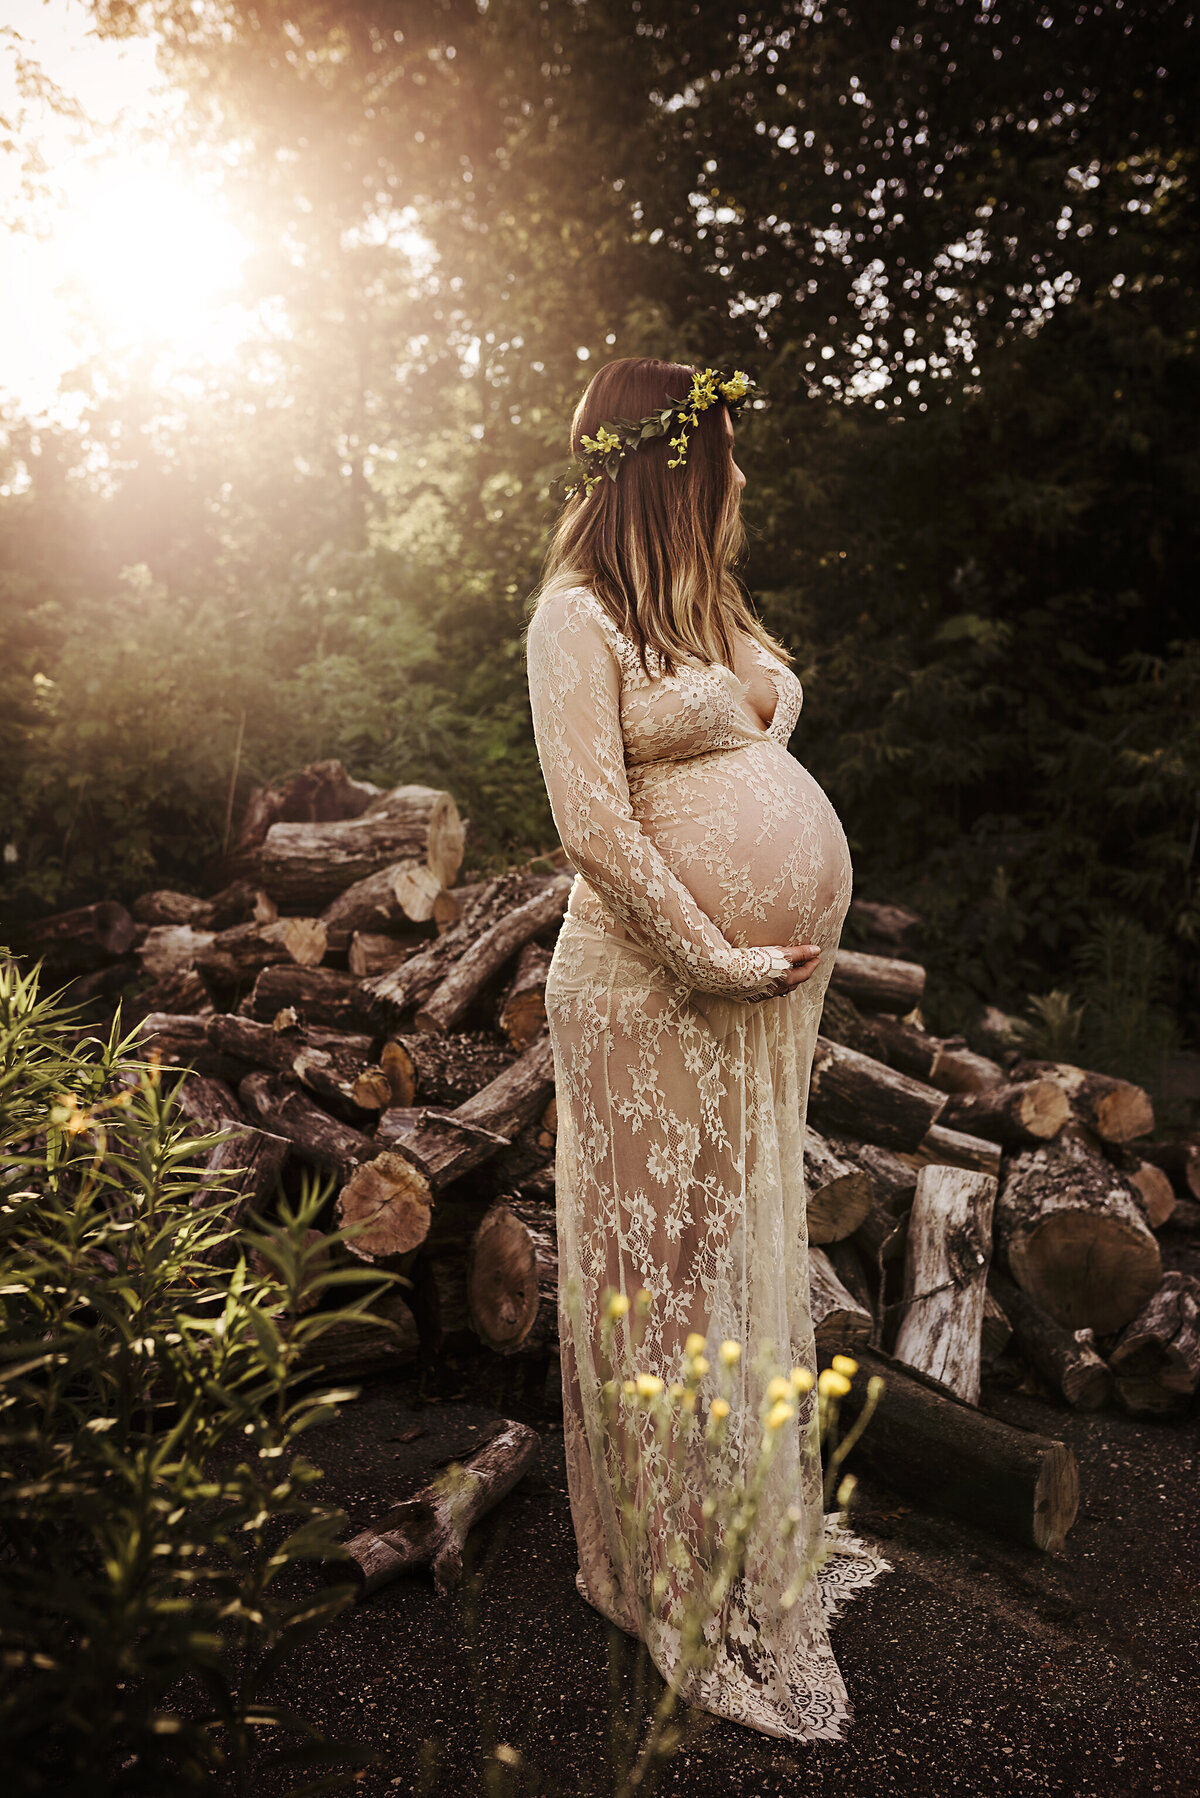 Radiate in nature's embrace during our maternity sessions. Shannon Kathleen Photography captures the radiant beauty of your expectant journey. Book now for natural radiance